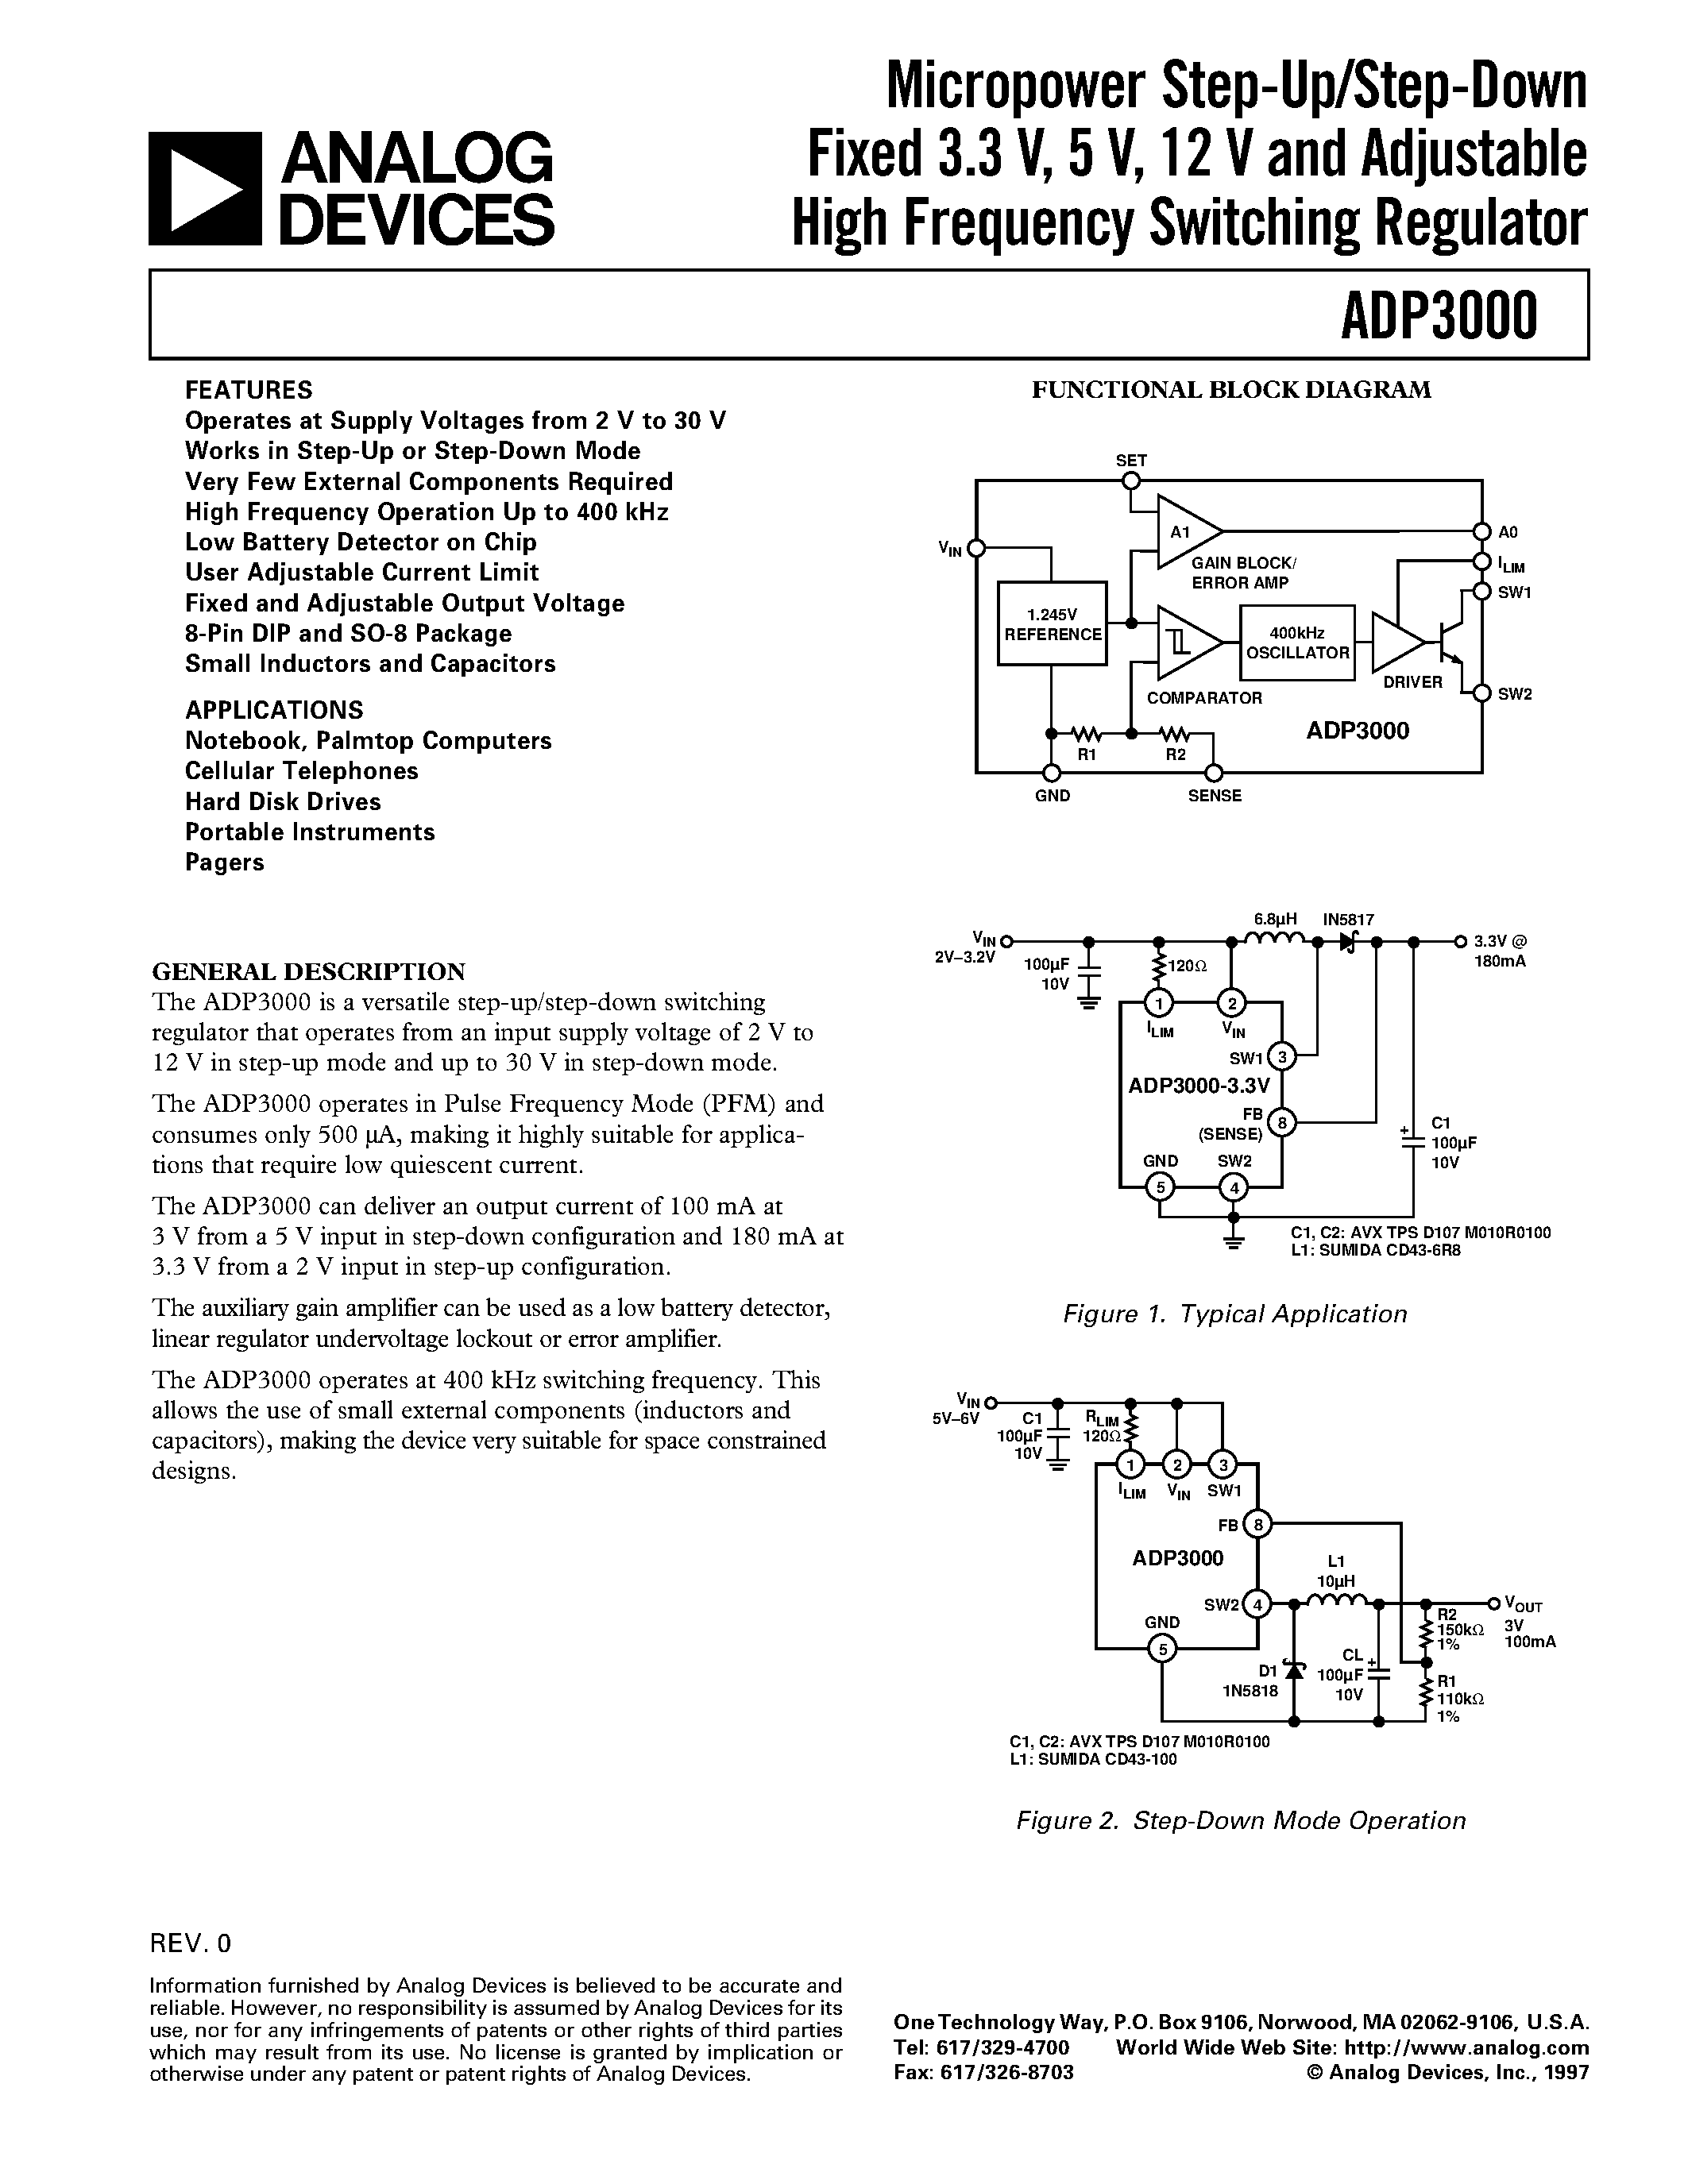 Даташит ADP3000AN-5 - Micropower Step-Up/Step-Down Fixed 3.3 V/ 5 V/ 12 V and Adjustable High Frequency Switching Regulator страница 1